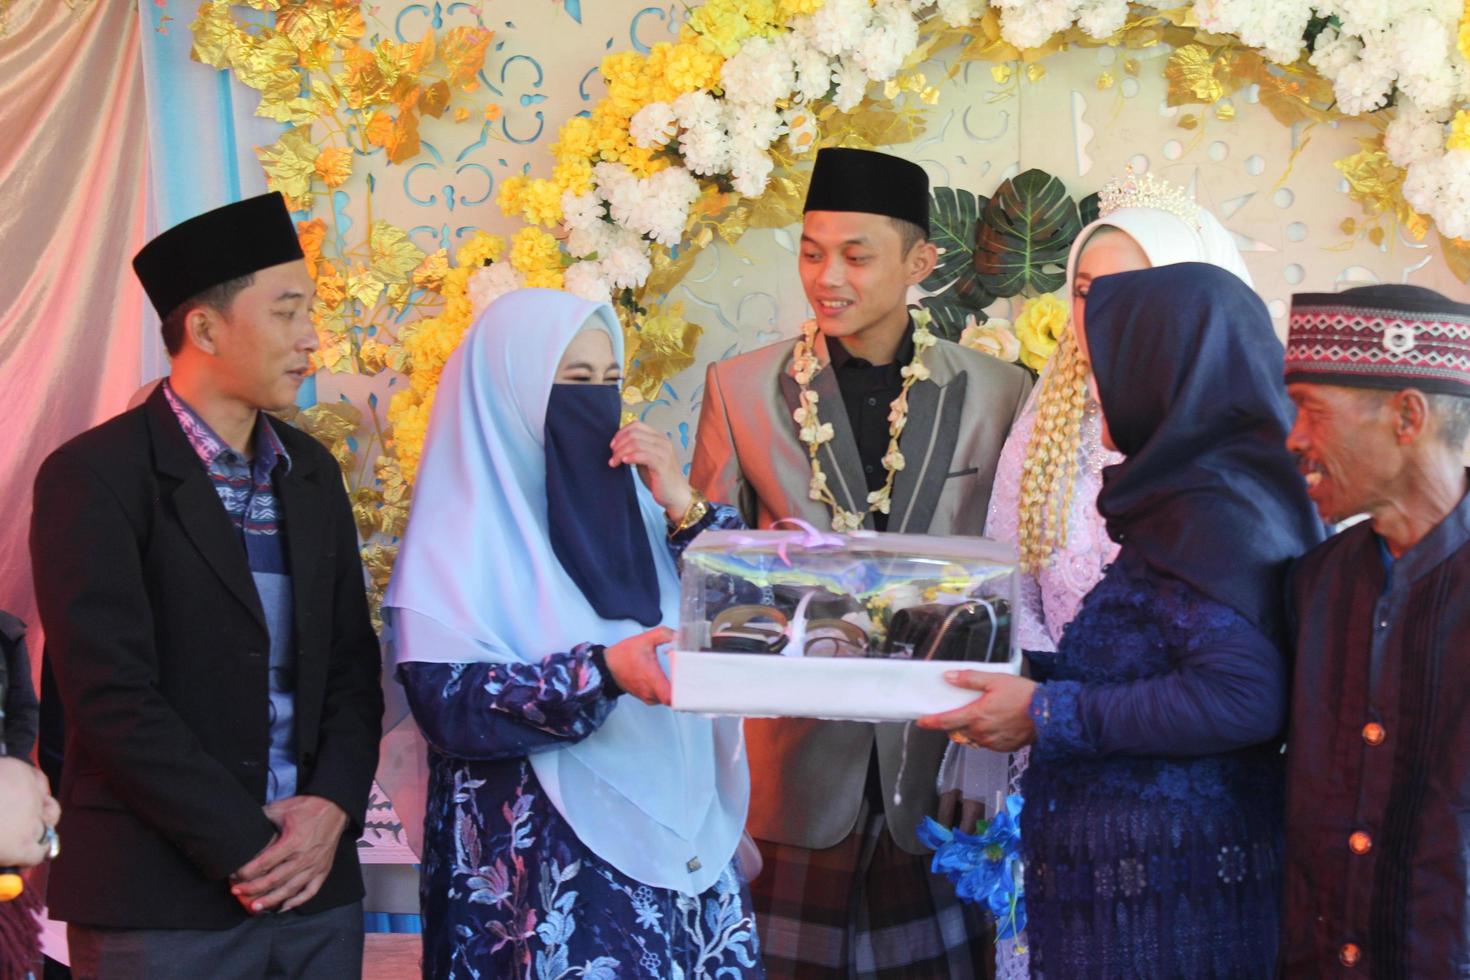 Cianjur Regency, West Java, Indonesia on June 12, 2021, The culture of offerings in marriage. Marriage culture of Muslims from Indonesia photo